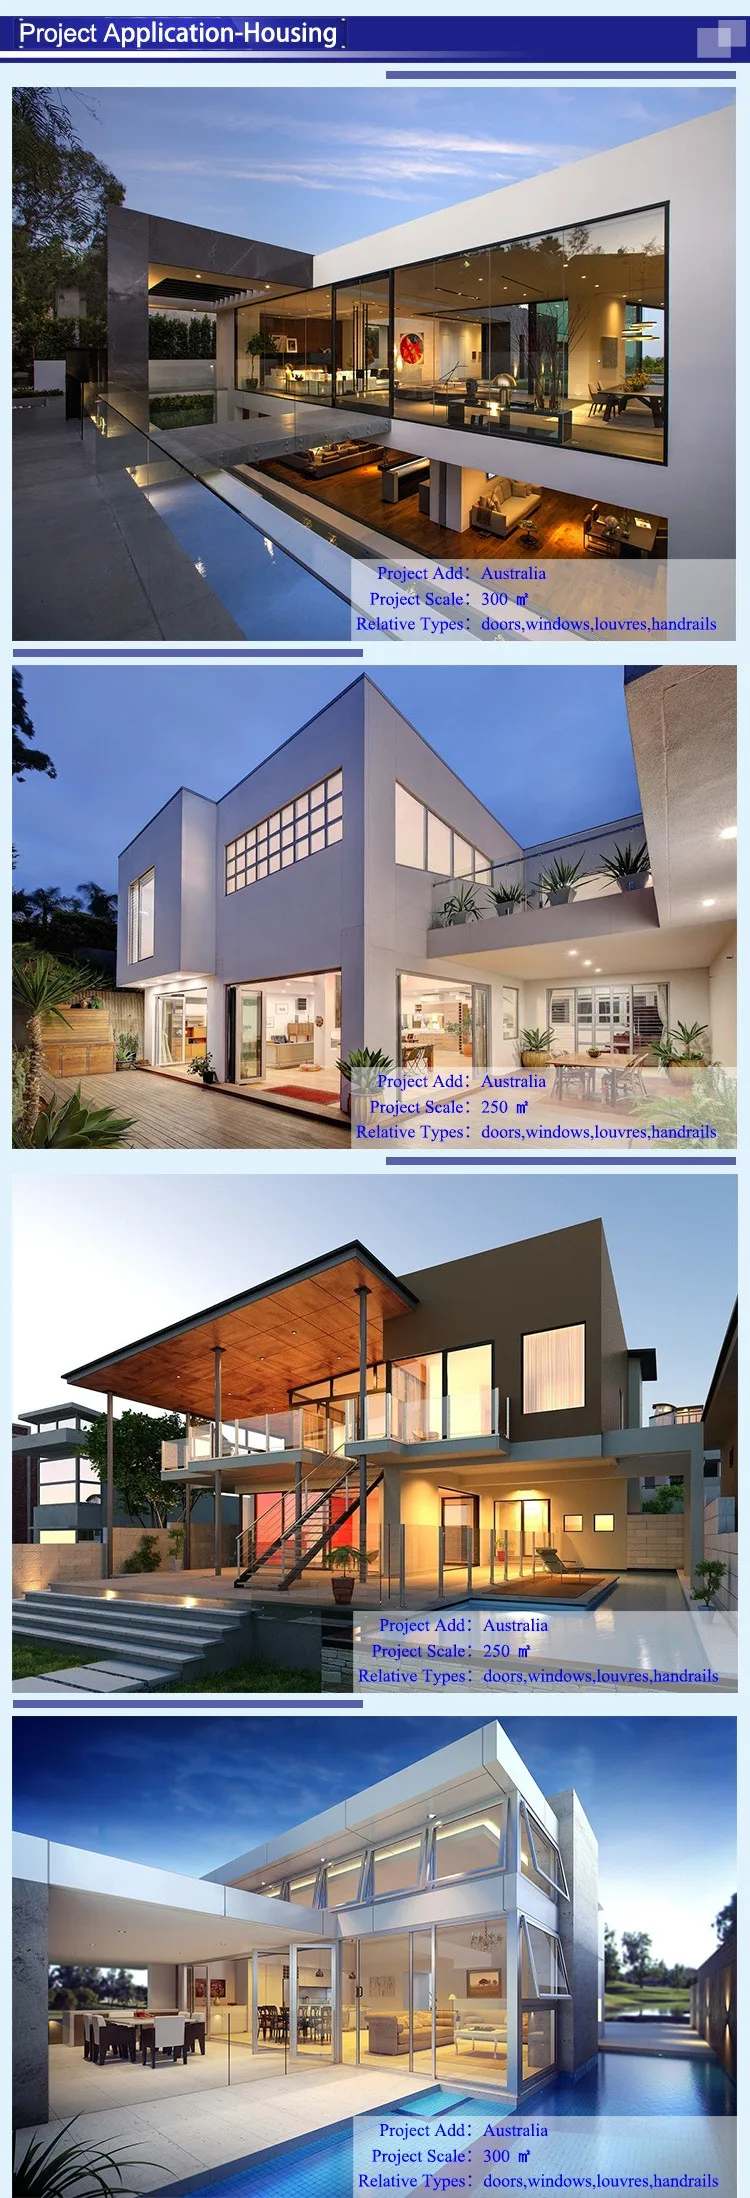 Australia standard aluminum fixed windows with louver windows best quality factory direct supply